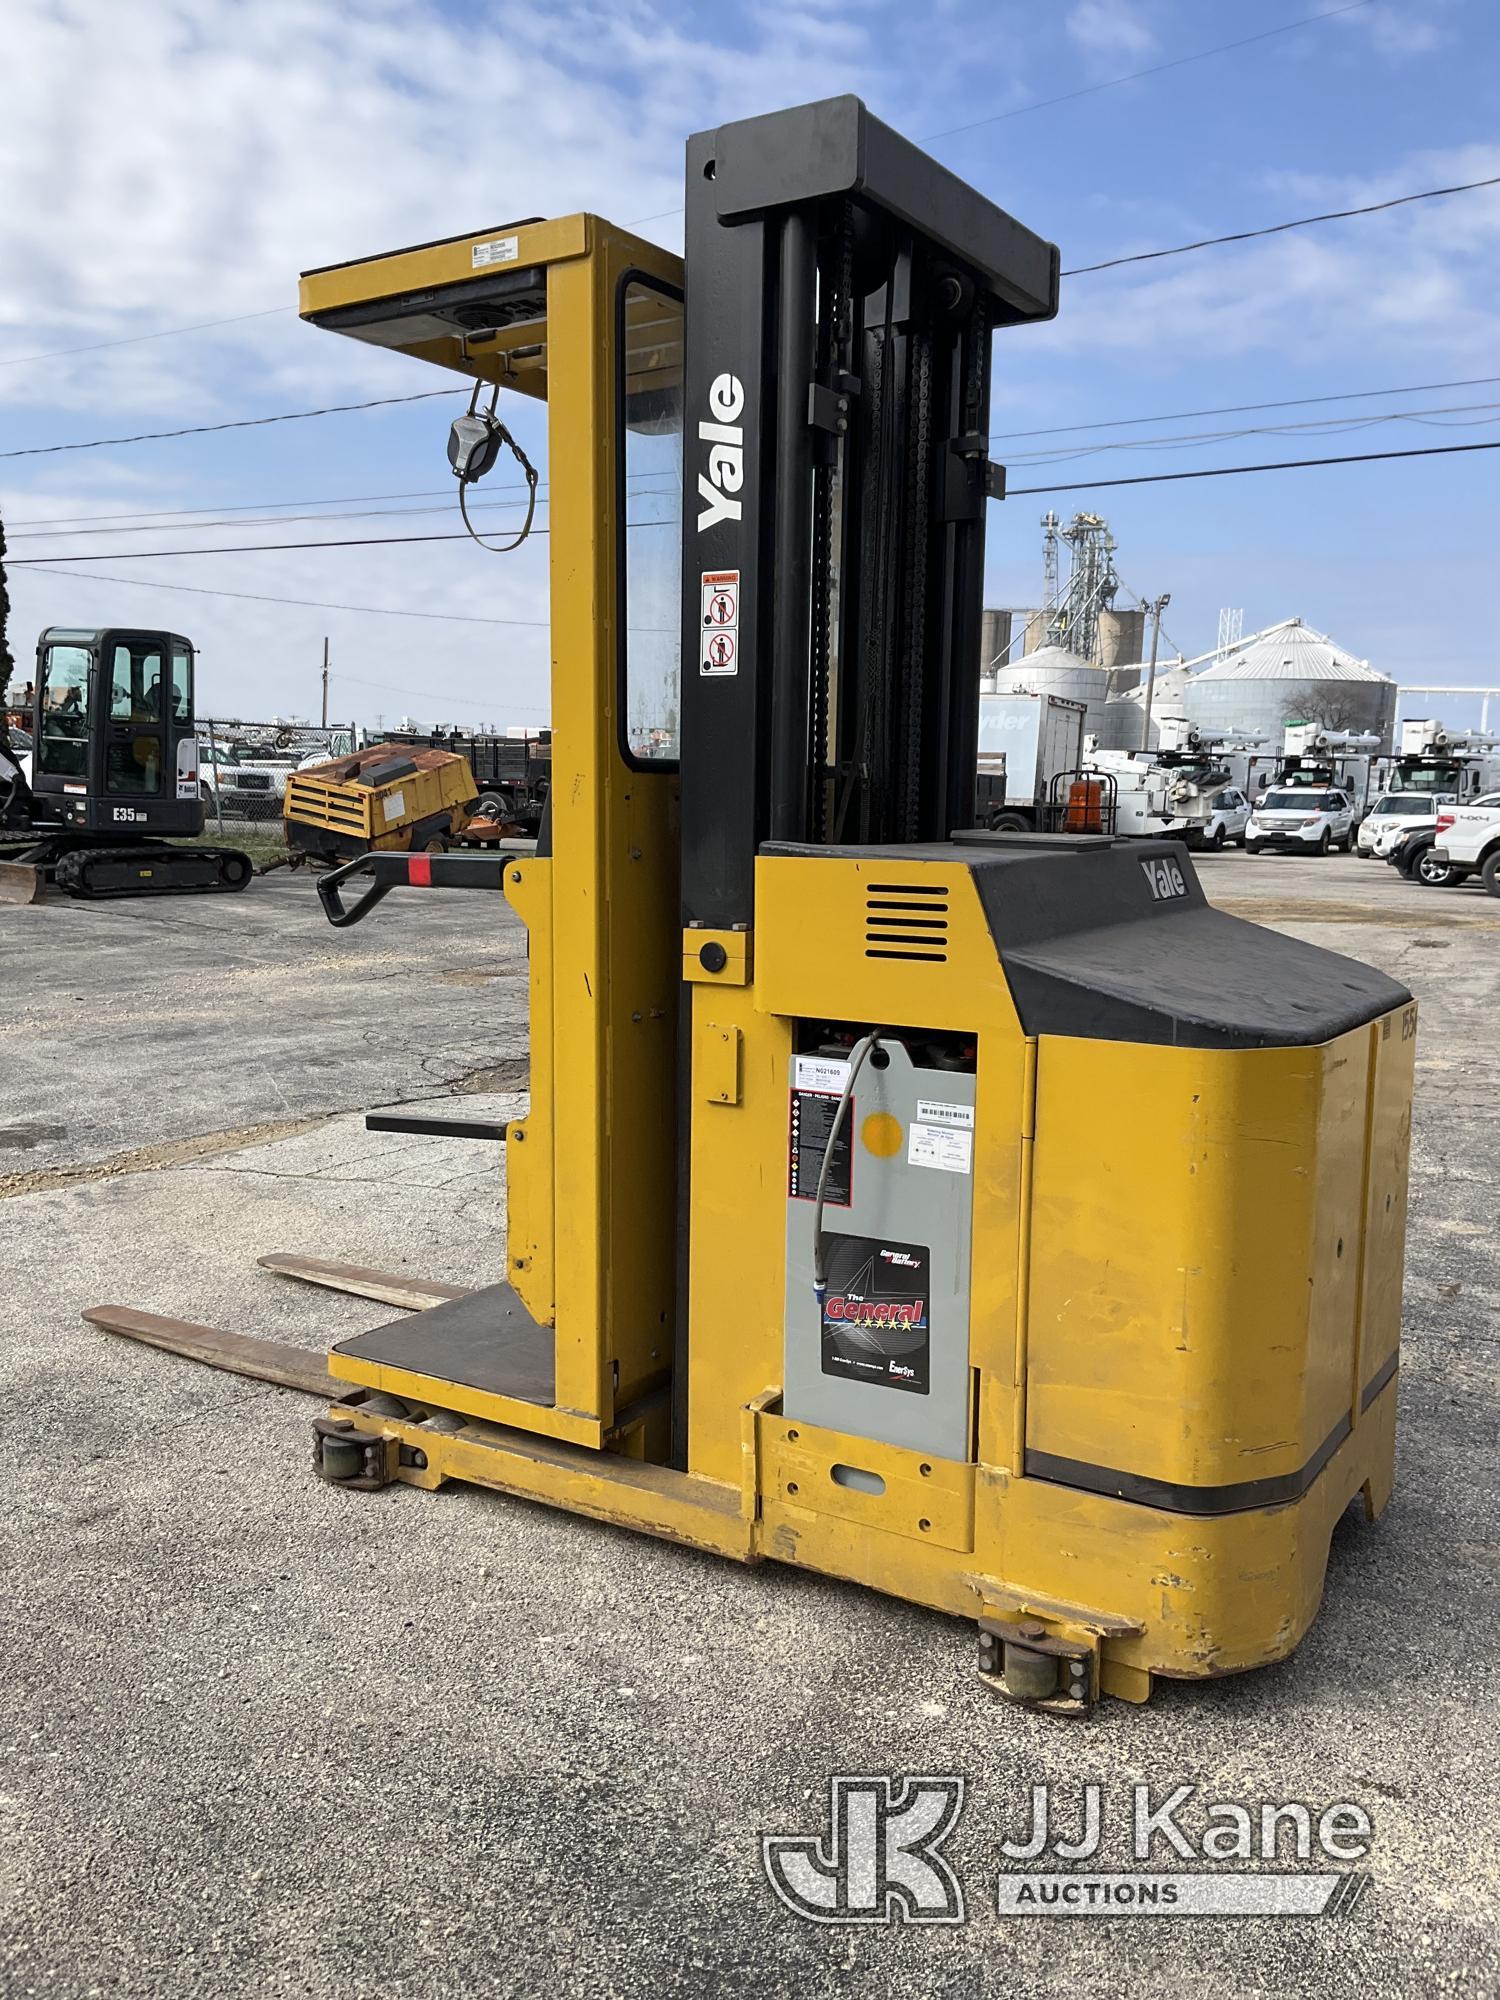 (South Beloit, IL) 2005 Yale Stand-Up Narrow Aisle Forklift Order Picker Runs, Moves, Operates